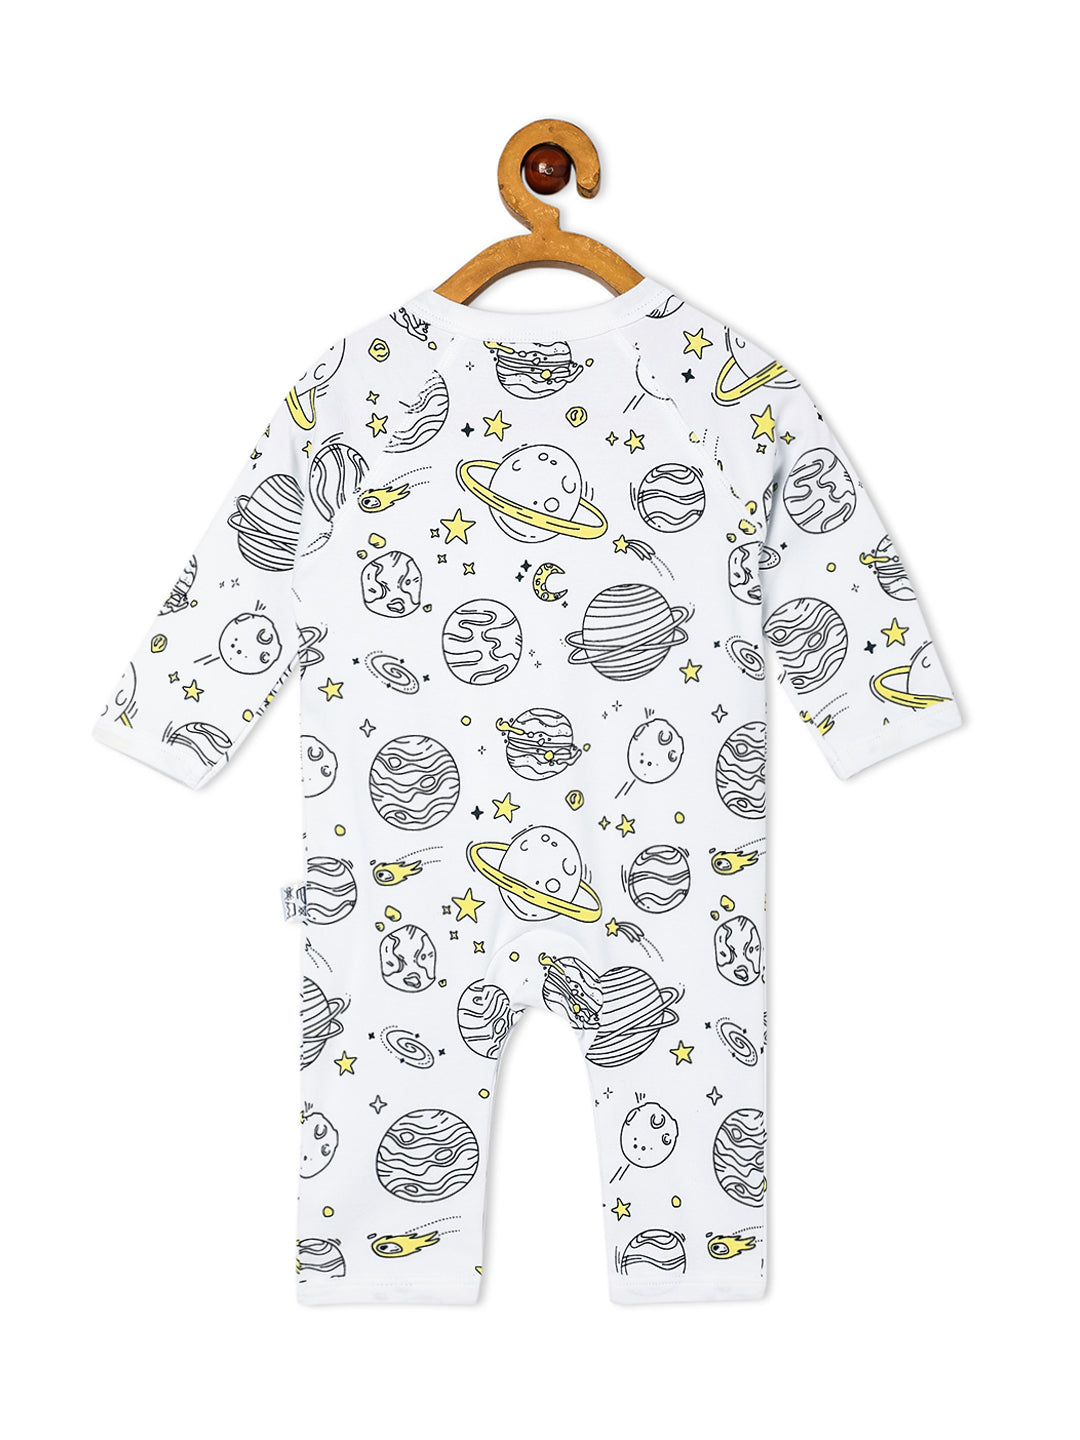 Jabla Style Infant Romper Combo of 3-Planet World-Submarine Ride-Tour to the Space